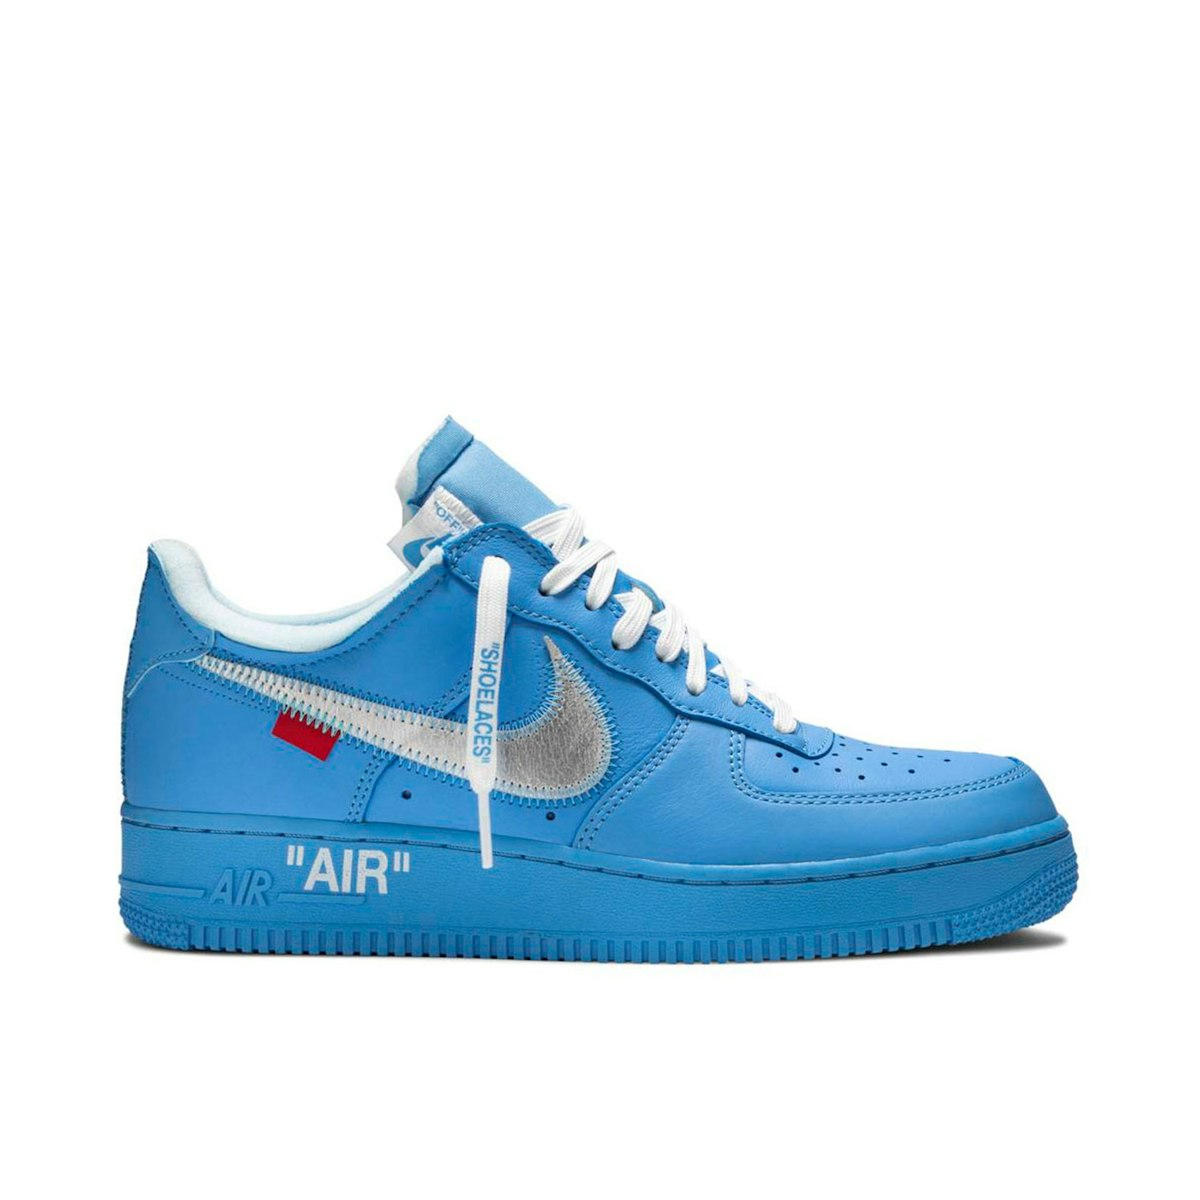 Nike Air Force 1 Low White/University Blue Release